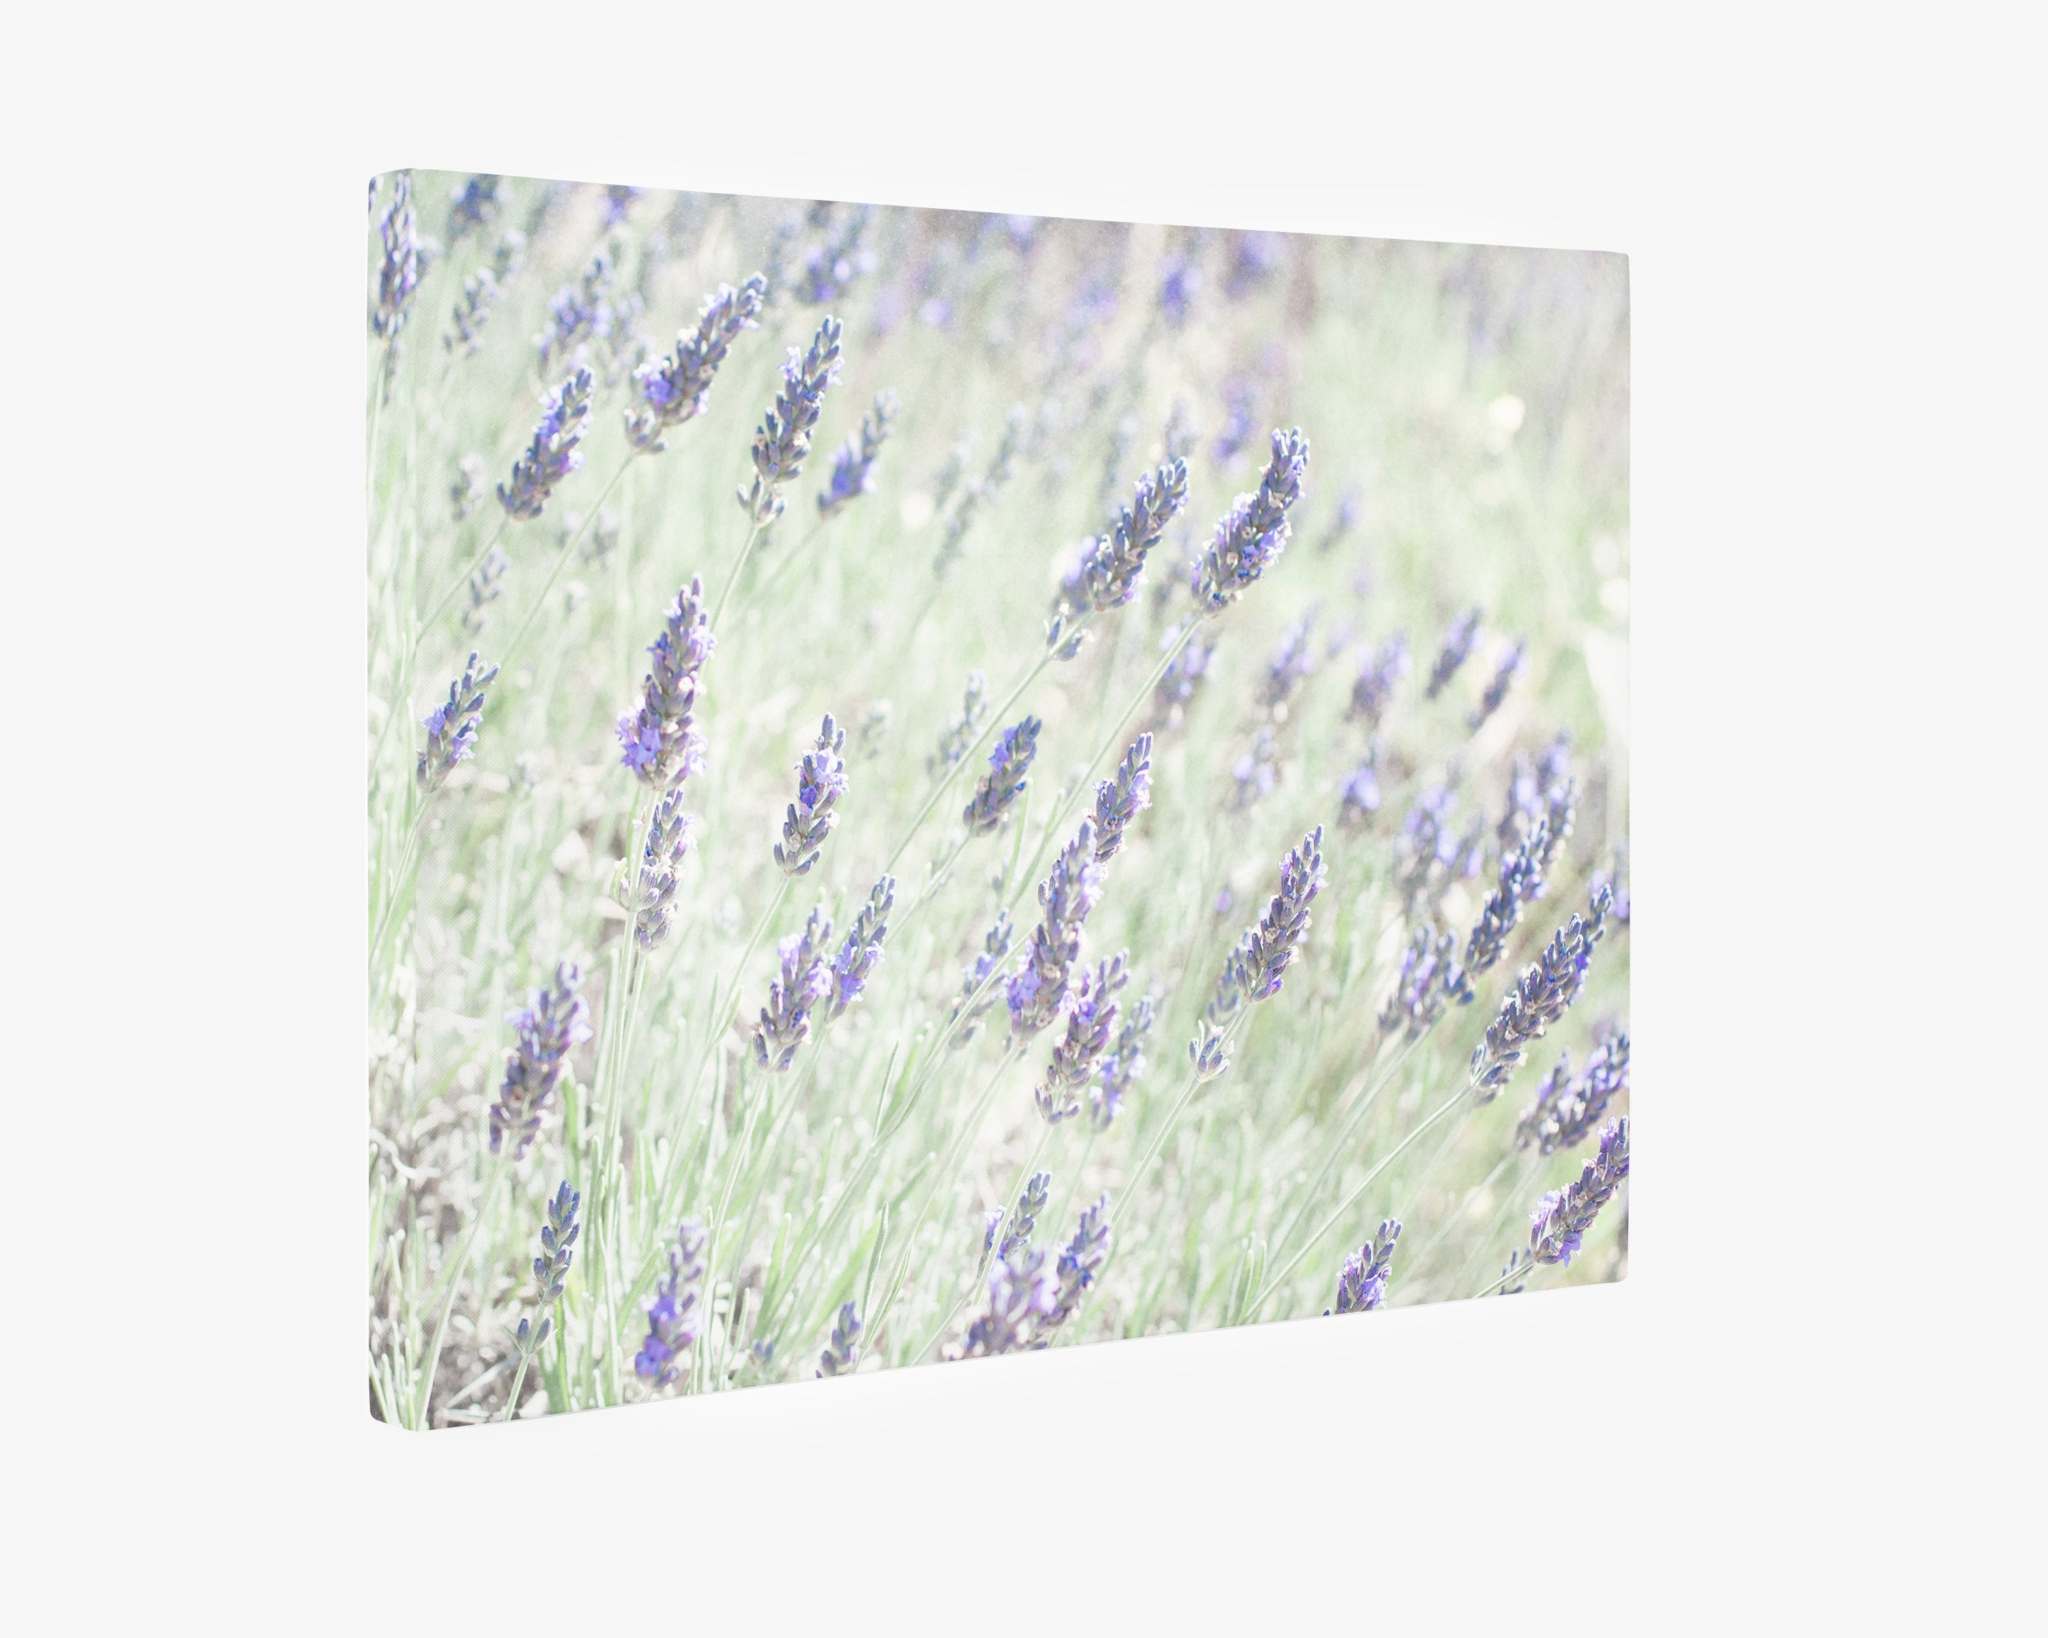 A Floral Purple Canvas Wall Art, &#39;Lavender for LaLa&#39; by Offley Green depicting a field of lavender flowers in soft focus. The lavender stalks, adorned with purple blooms, sway gently amidst a backdrop of light green grasses, creating a calming, airy scene. This pastel-toned living room decor piece enhances the tranquil ambiance.